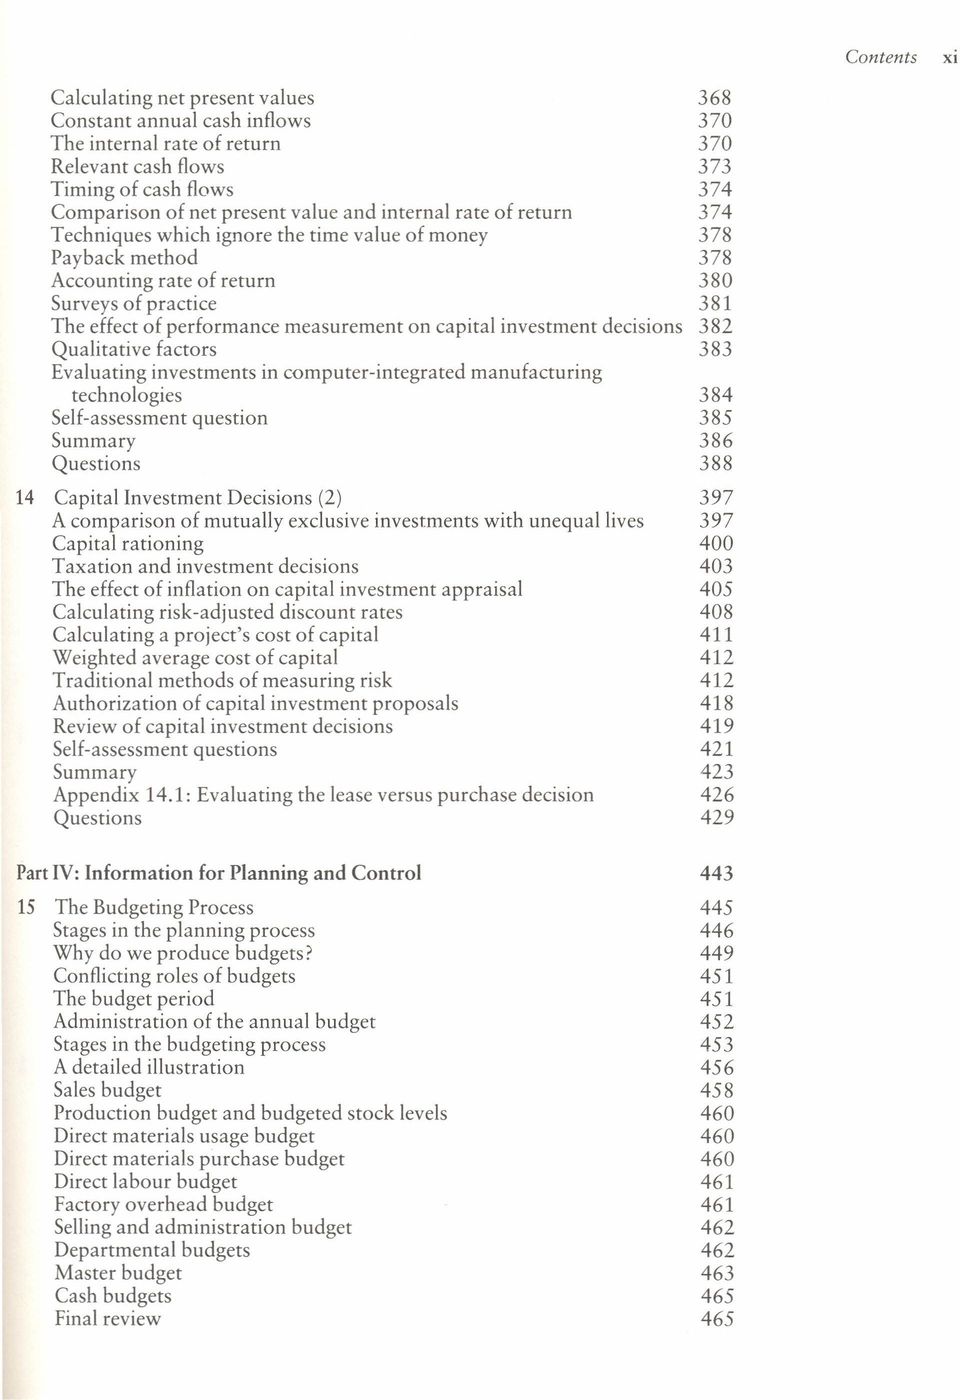 capital investment decisions 382 Qualitative factors 383 Evaluating investments in computer-integrated manufacturing technologies 384 Self-assessment question 385 Summary 386 388 14 Capital